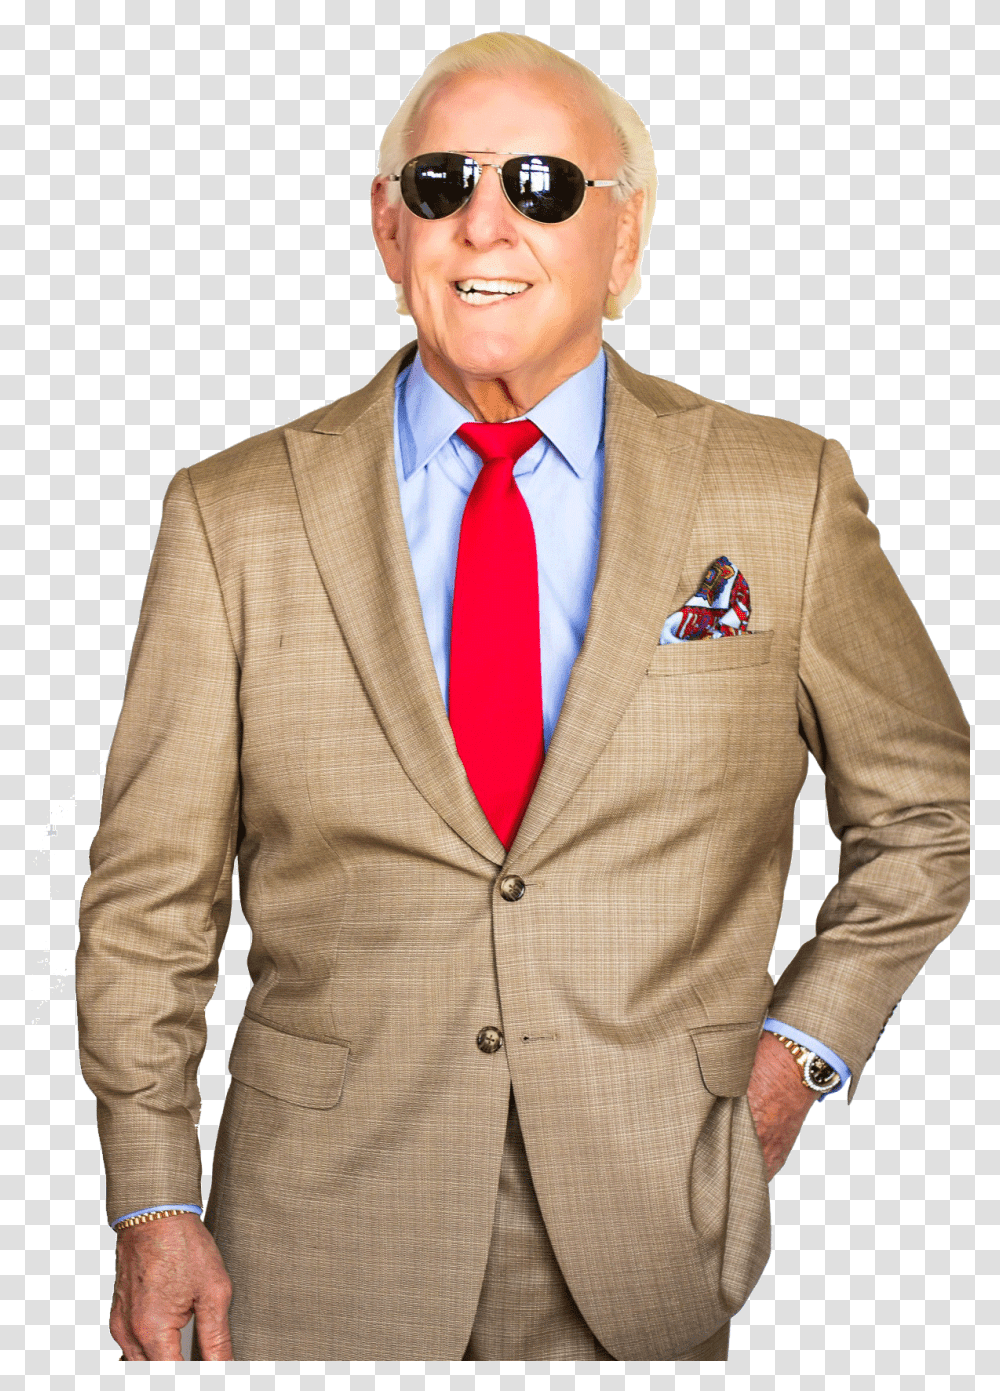 Championship Gold Custom Suit Ric Flair Collection Ric Flair In A Suit, Tie, Accessories, Accessory, Sunglasses Transparent Png